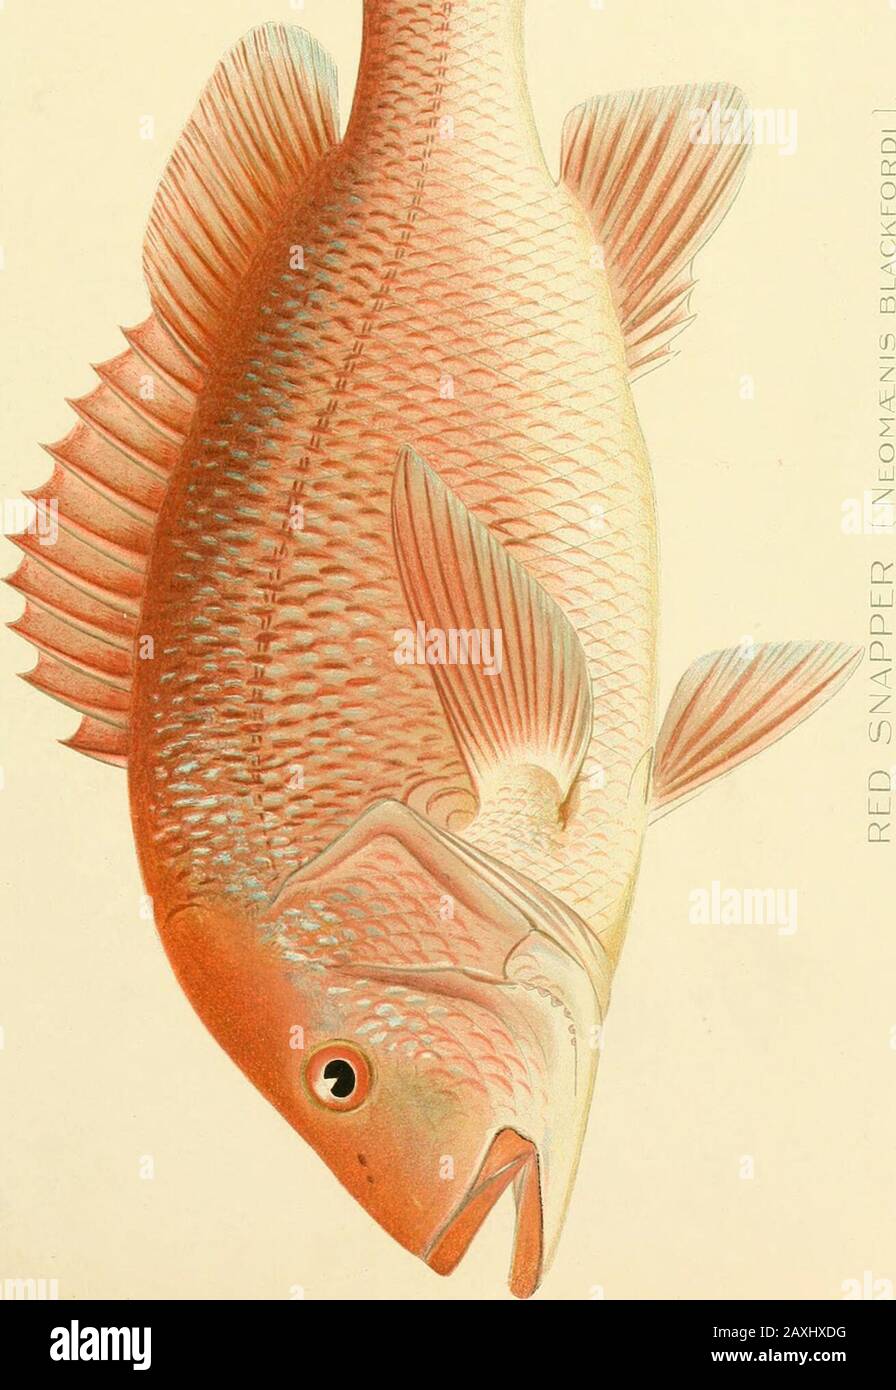 The food and game fishes of New York: . ackish above, silvery gray on the sides, often blotched and tinged with yellow;fins dusky gray, sometimes mingled with yellow. The Flasher is a large species, found in all warm seas, ranging on our coast fromCape Cod to Panama ; it reaches the length of 3 feet and is used for food. AtWoods Hole, according to Dr. .Smitlr, it is vcr- rarely taken. Specimens weresecured, however, in August, 1873, December, 1875, September 20, 1886, and inAugust, i8go. The individual obtained in 1886 was caught in a trap at Menemsha,Marthas Vineyard. The Rhode Island Fish C Stock Photo